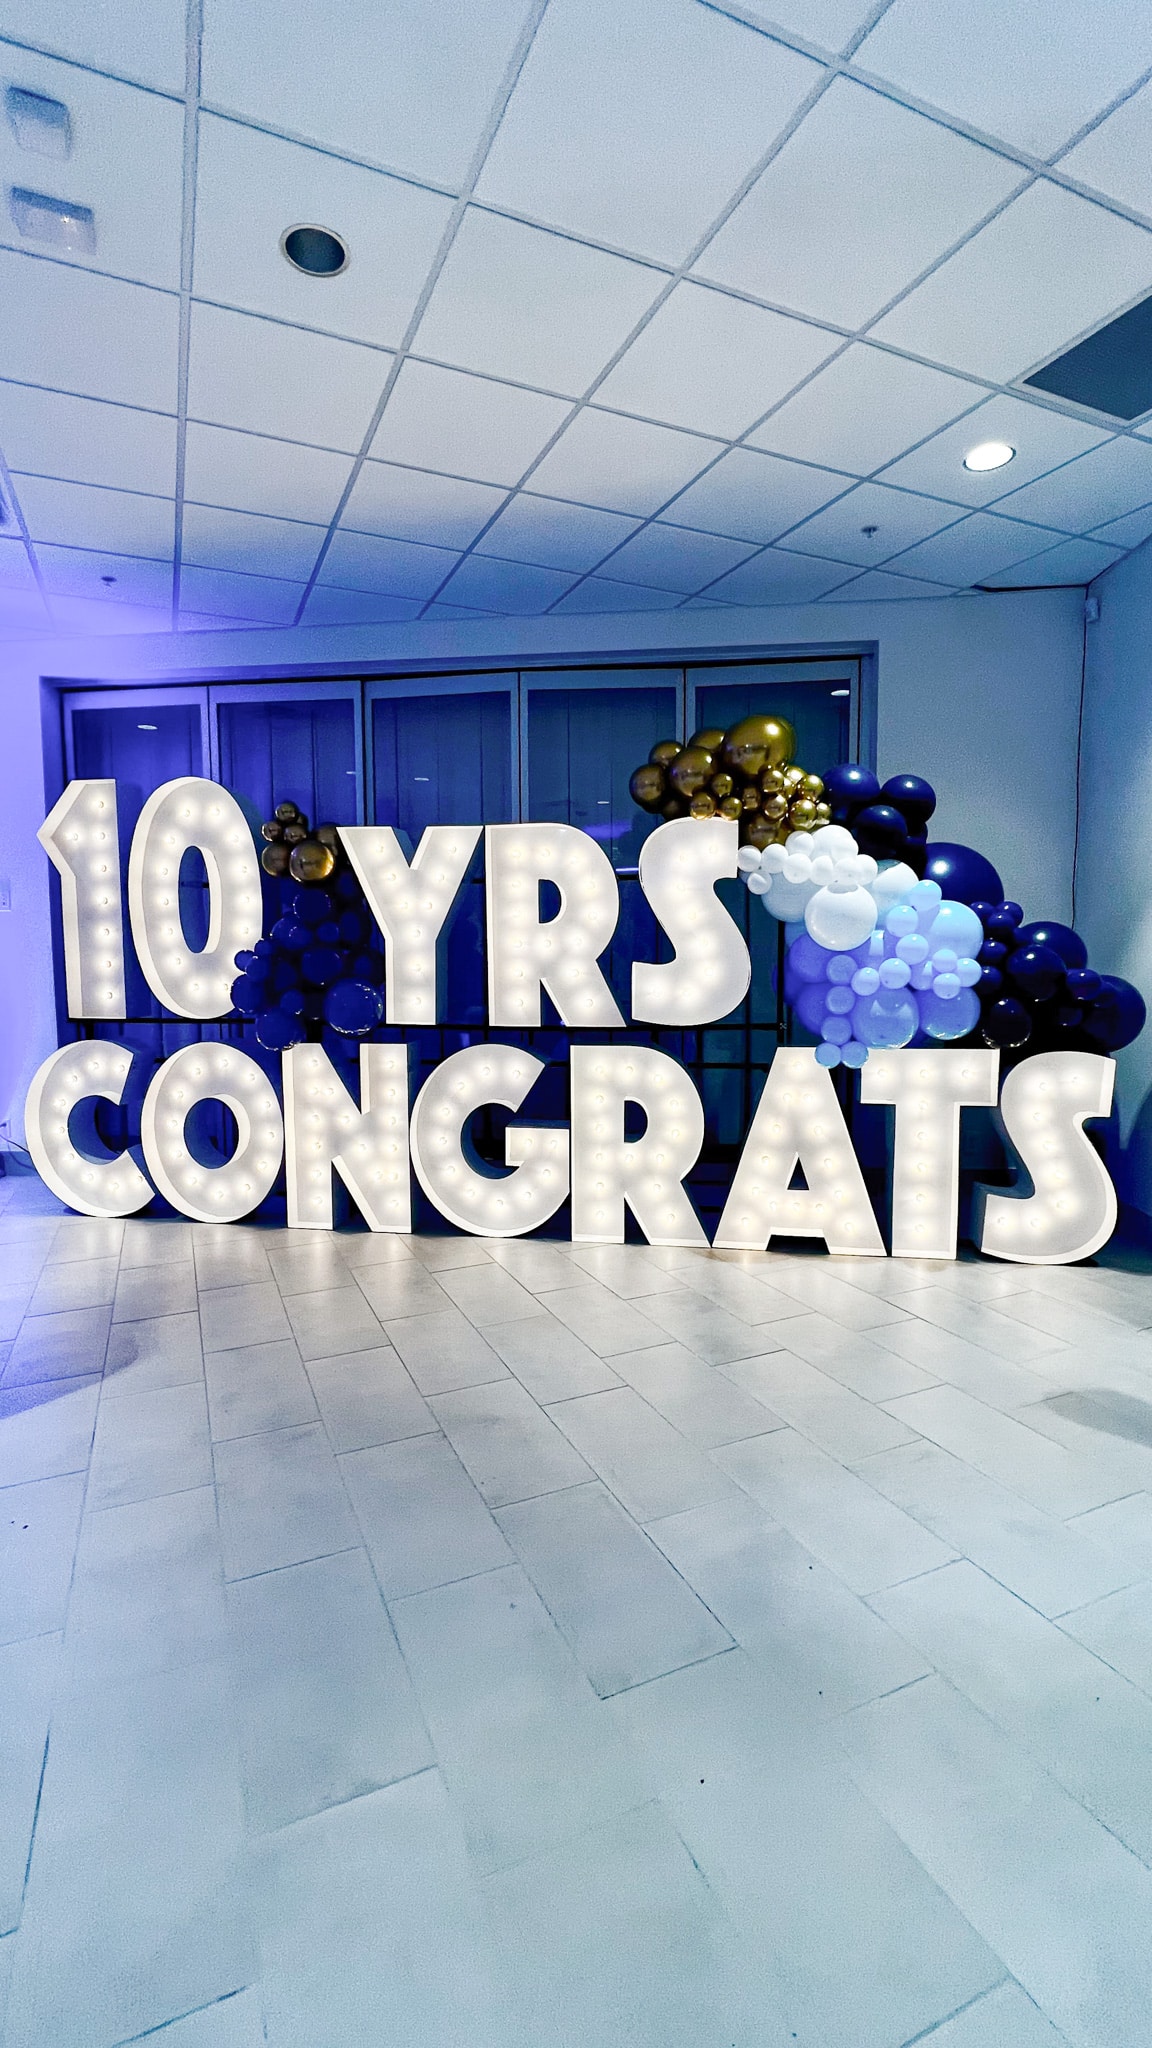 Light-Up Marquee Letters spelling out '10 YRS CONGRATS' with balloon display